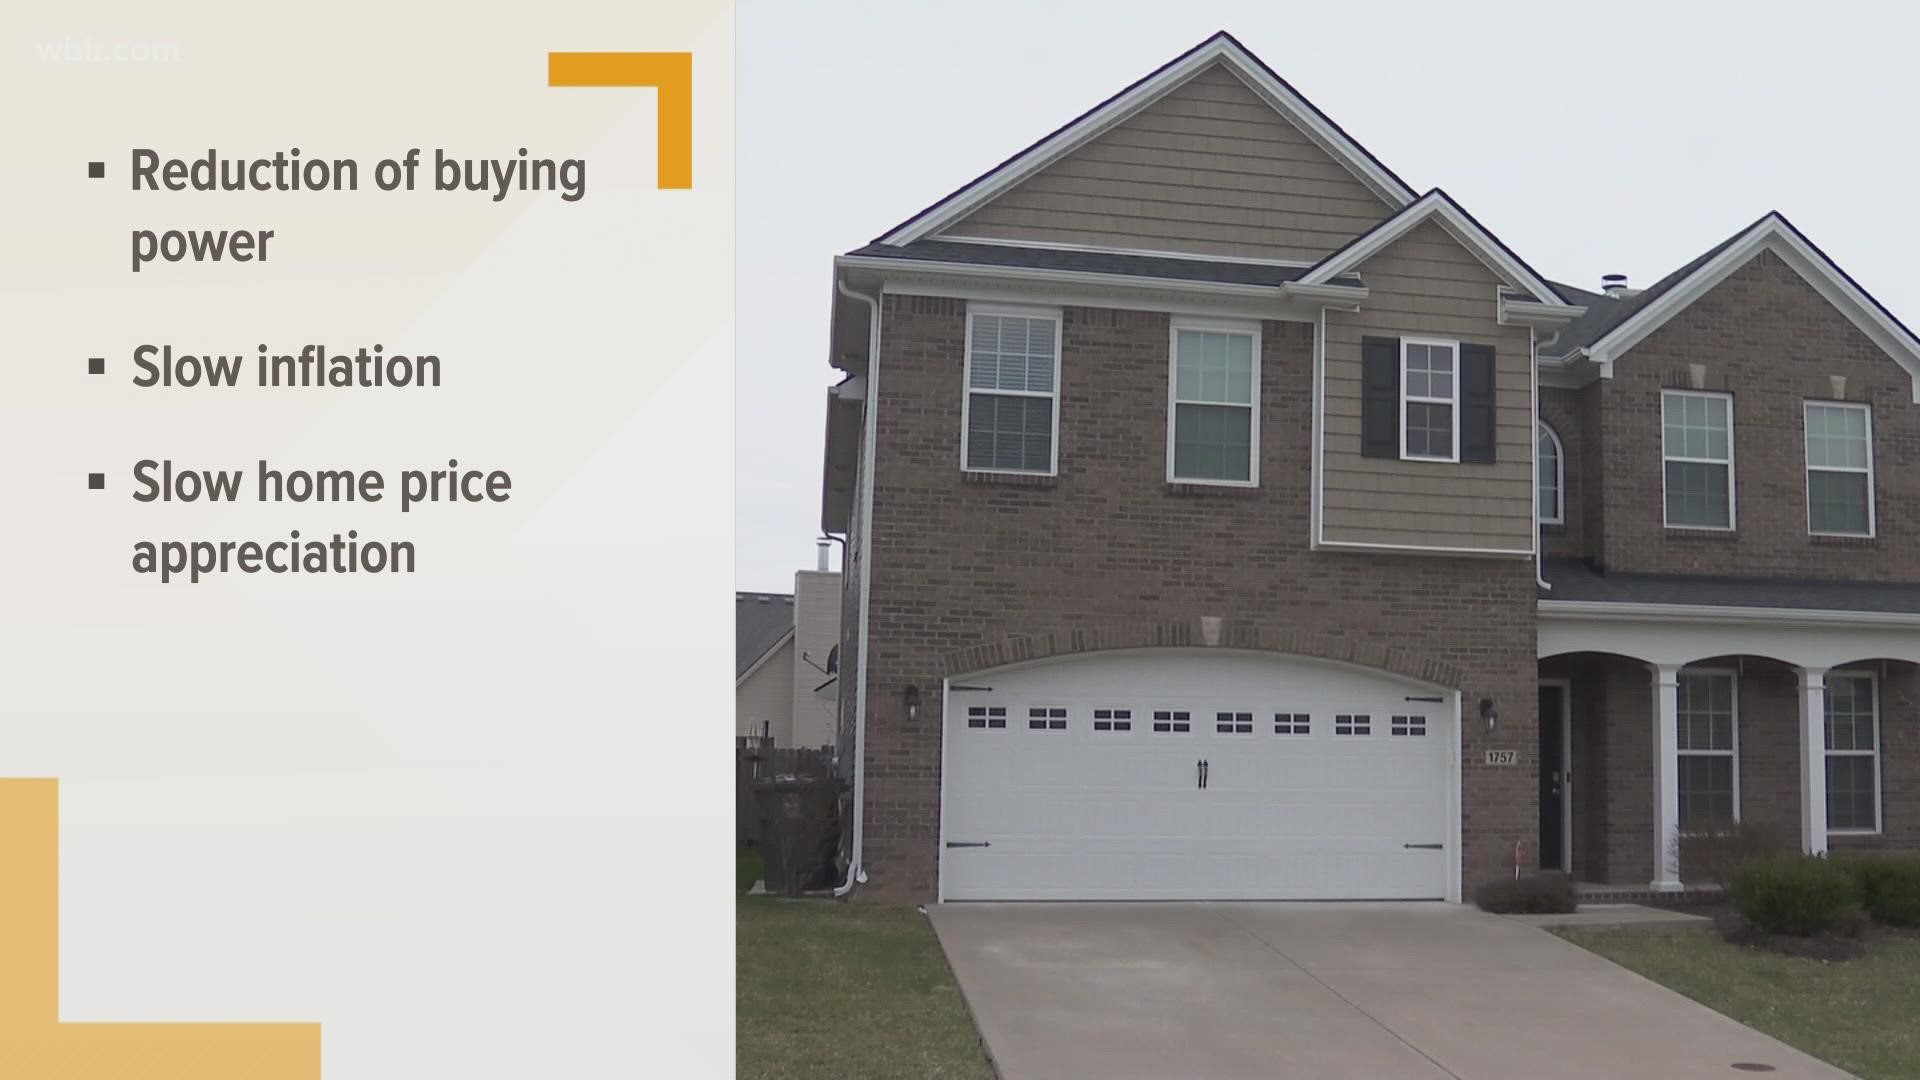 Eventually, prices will peak due to a lack of demand from buyers.